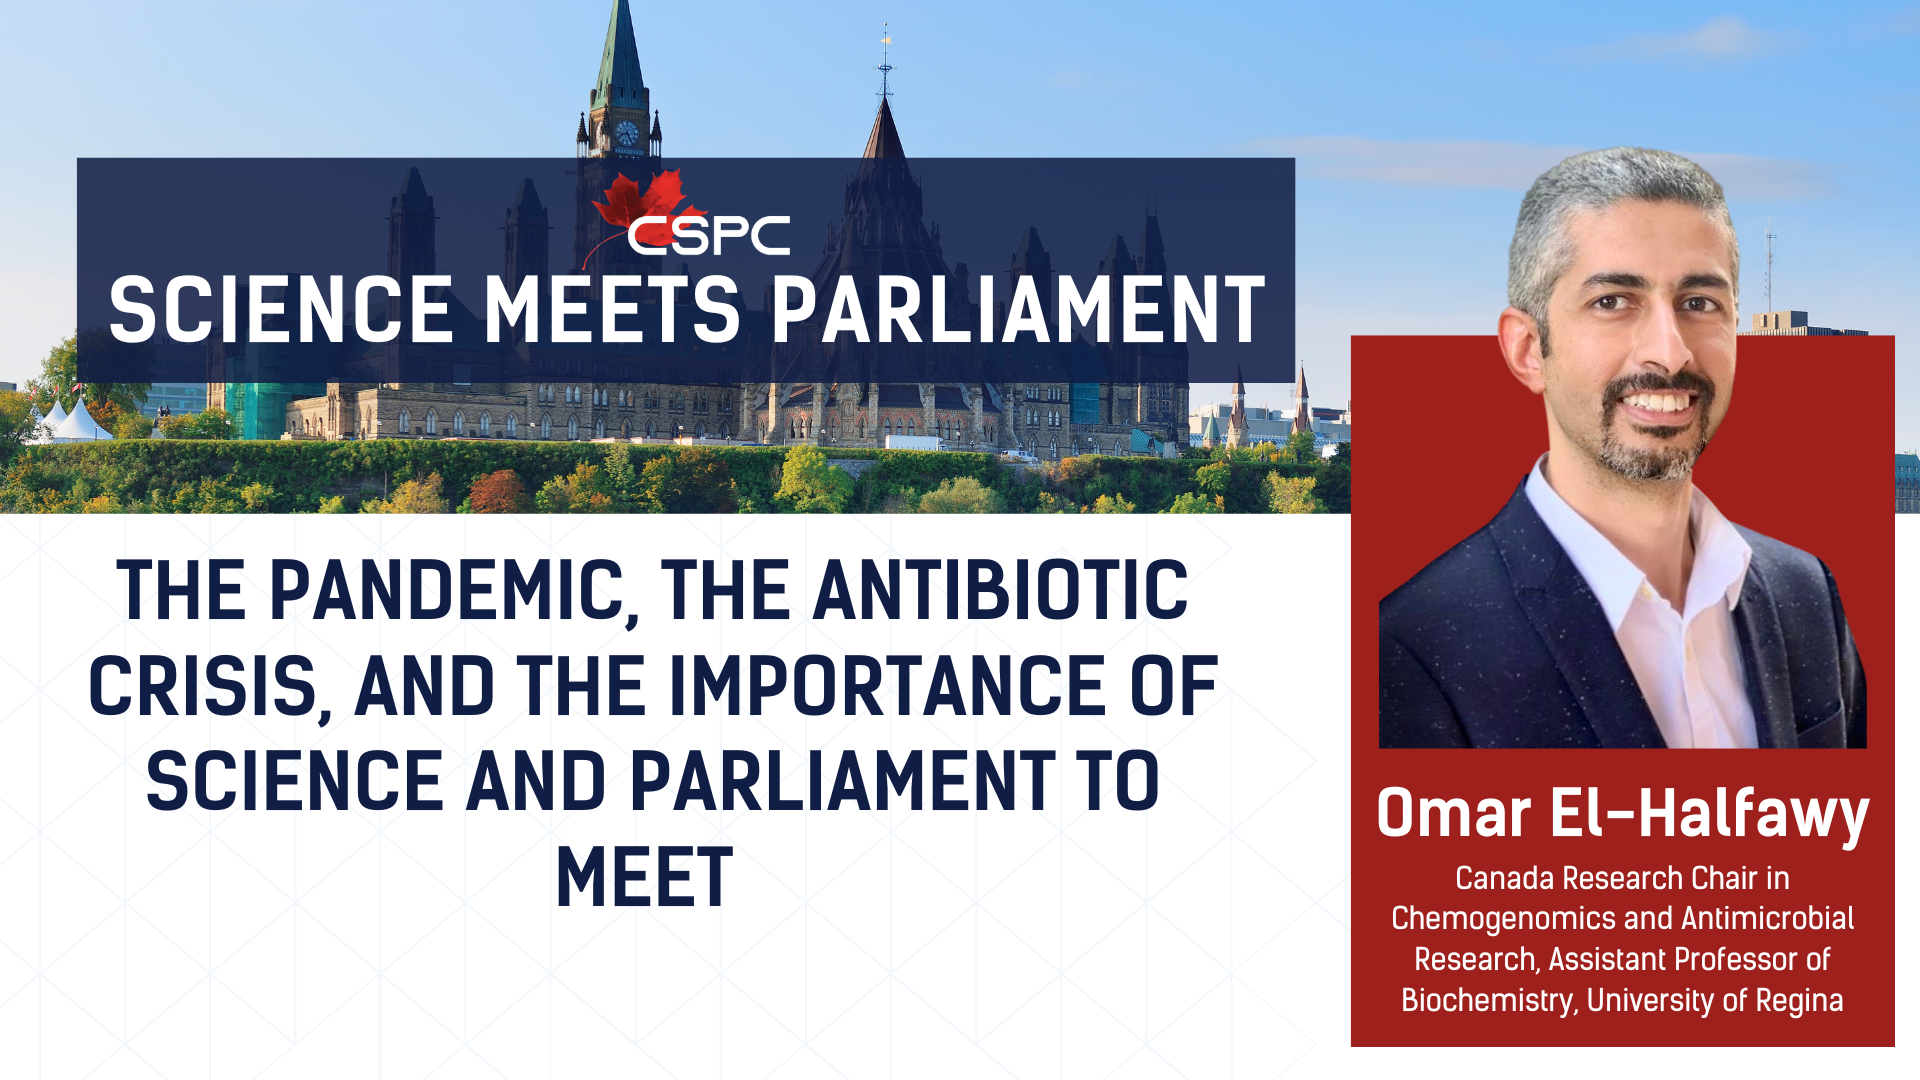 a banner with the title "The pandemic, the antibiotic crisis, and the importance of science and Parliament to meet" alongside the headshot of a middle eastern man